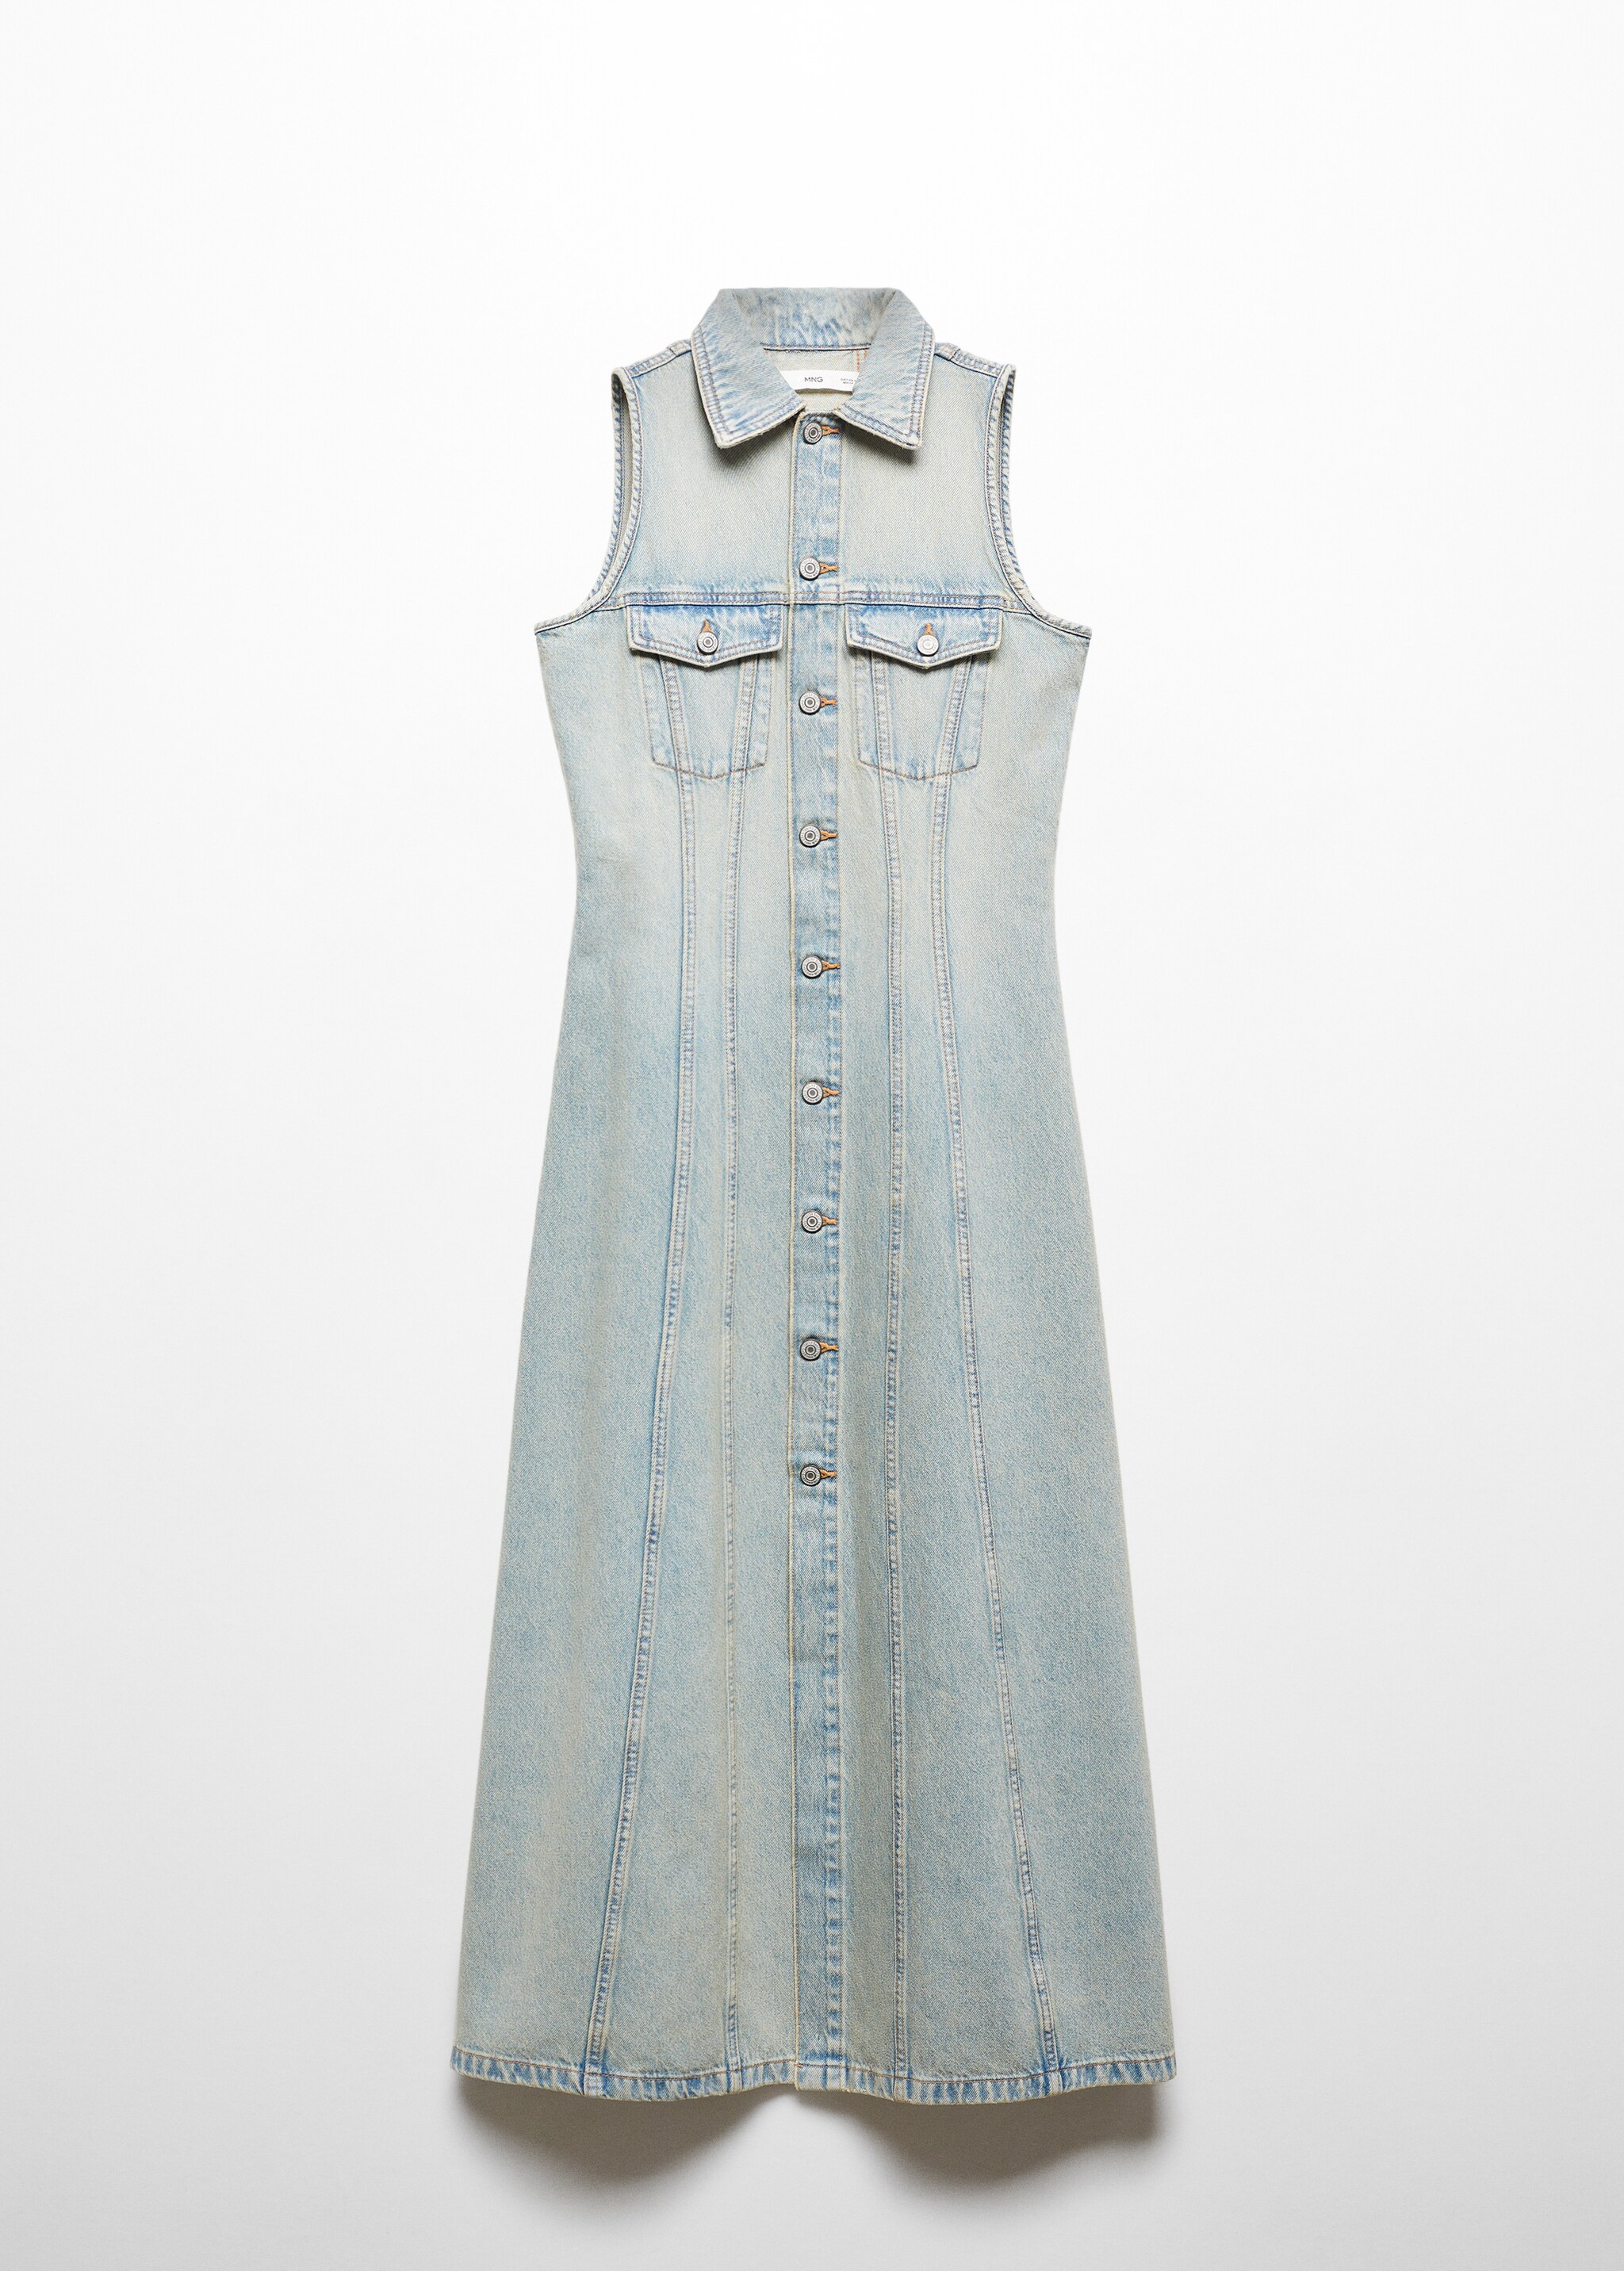 Button denim dress - Article without model